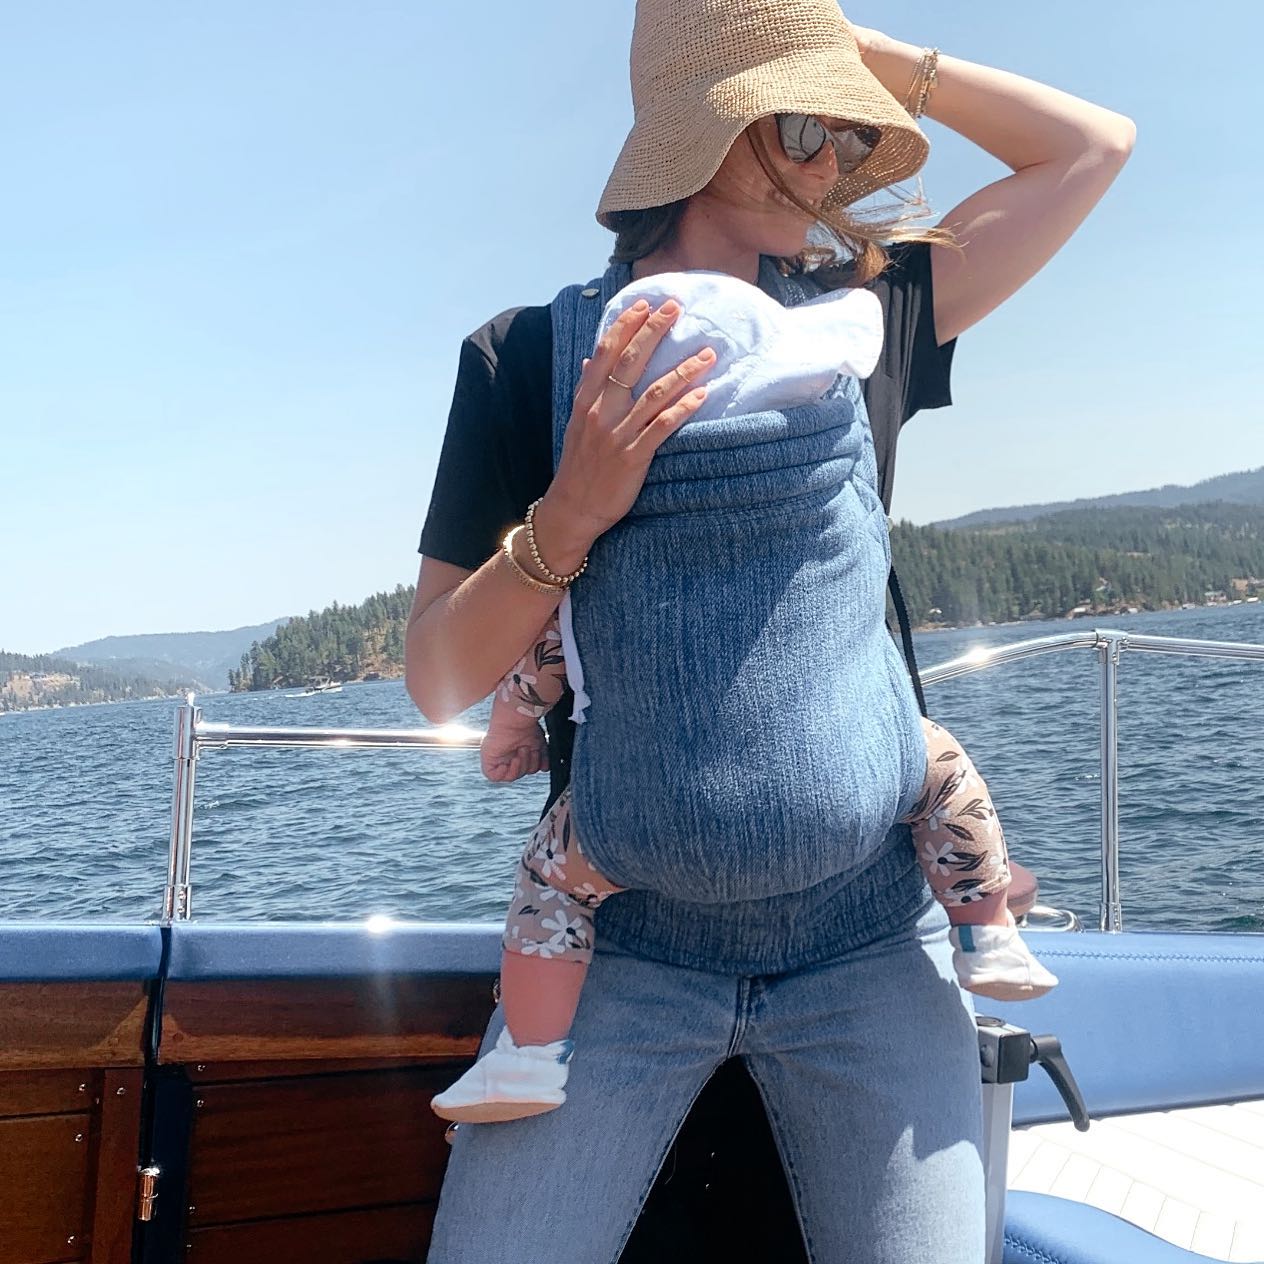  Katherine Schwarzenegger pictured with her and Chris Pratt's daughter, Lyla